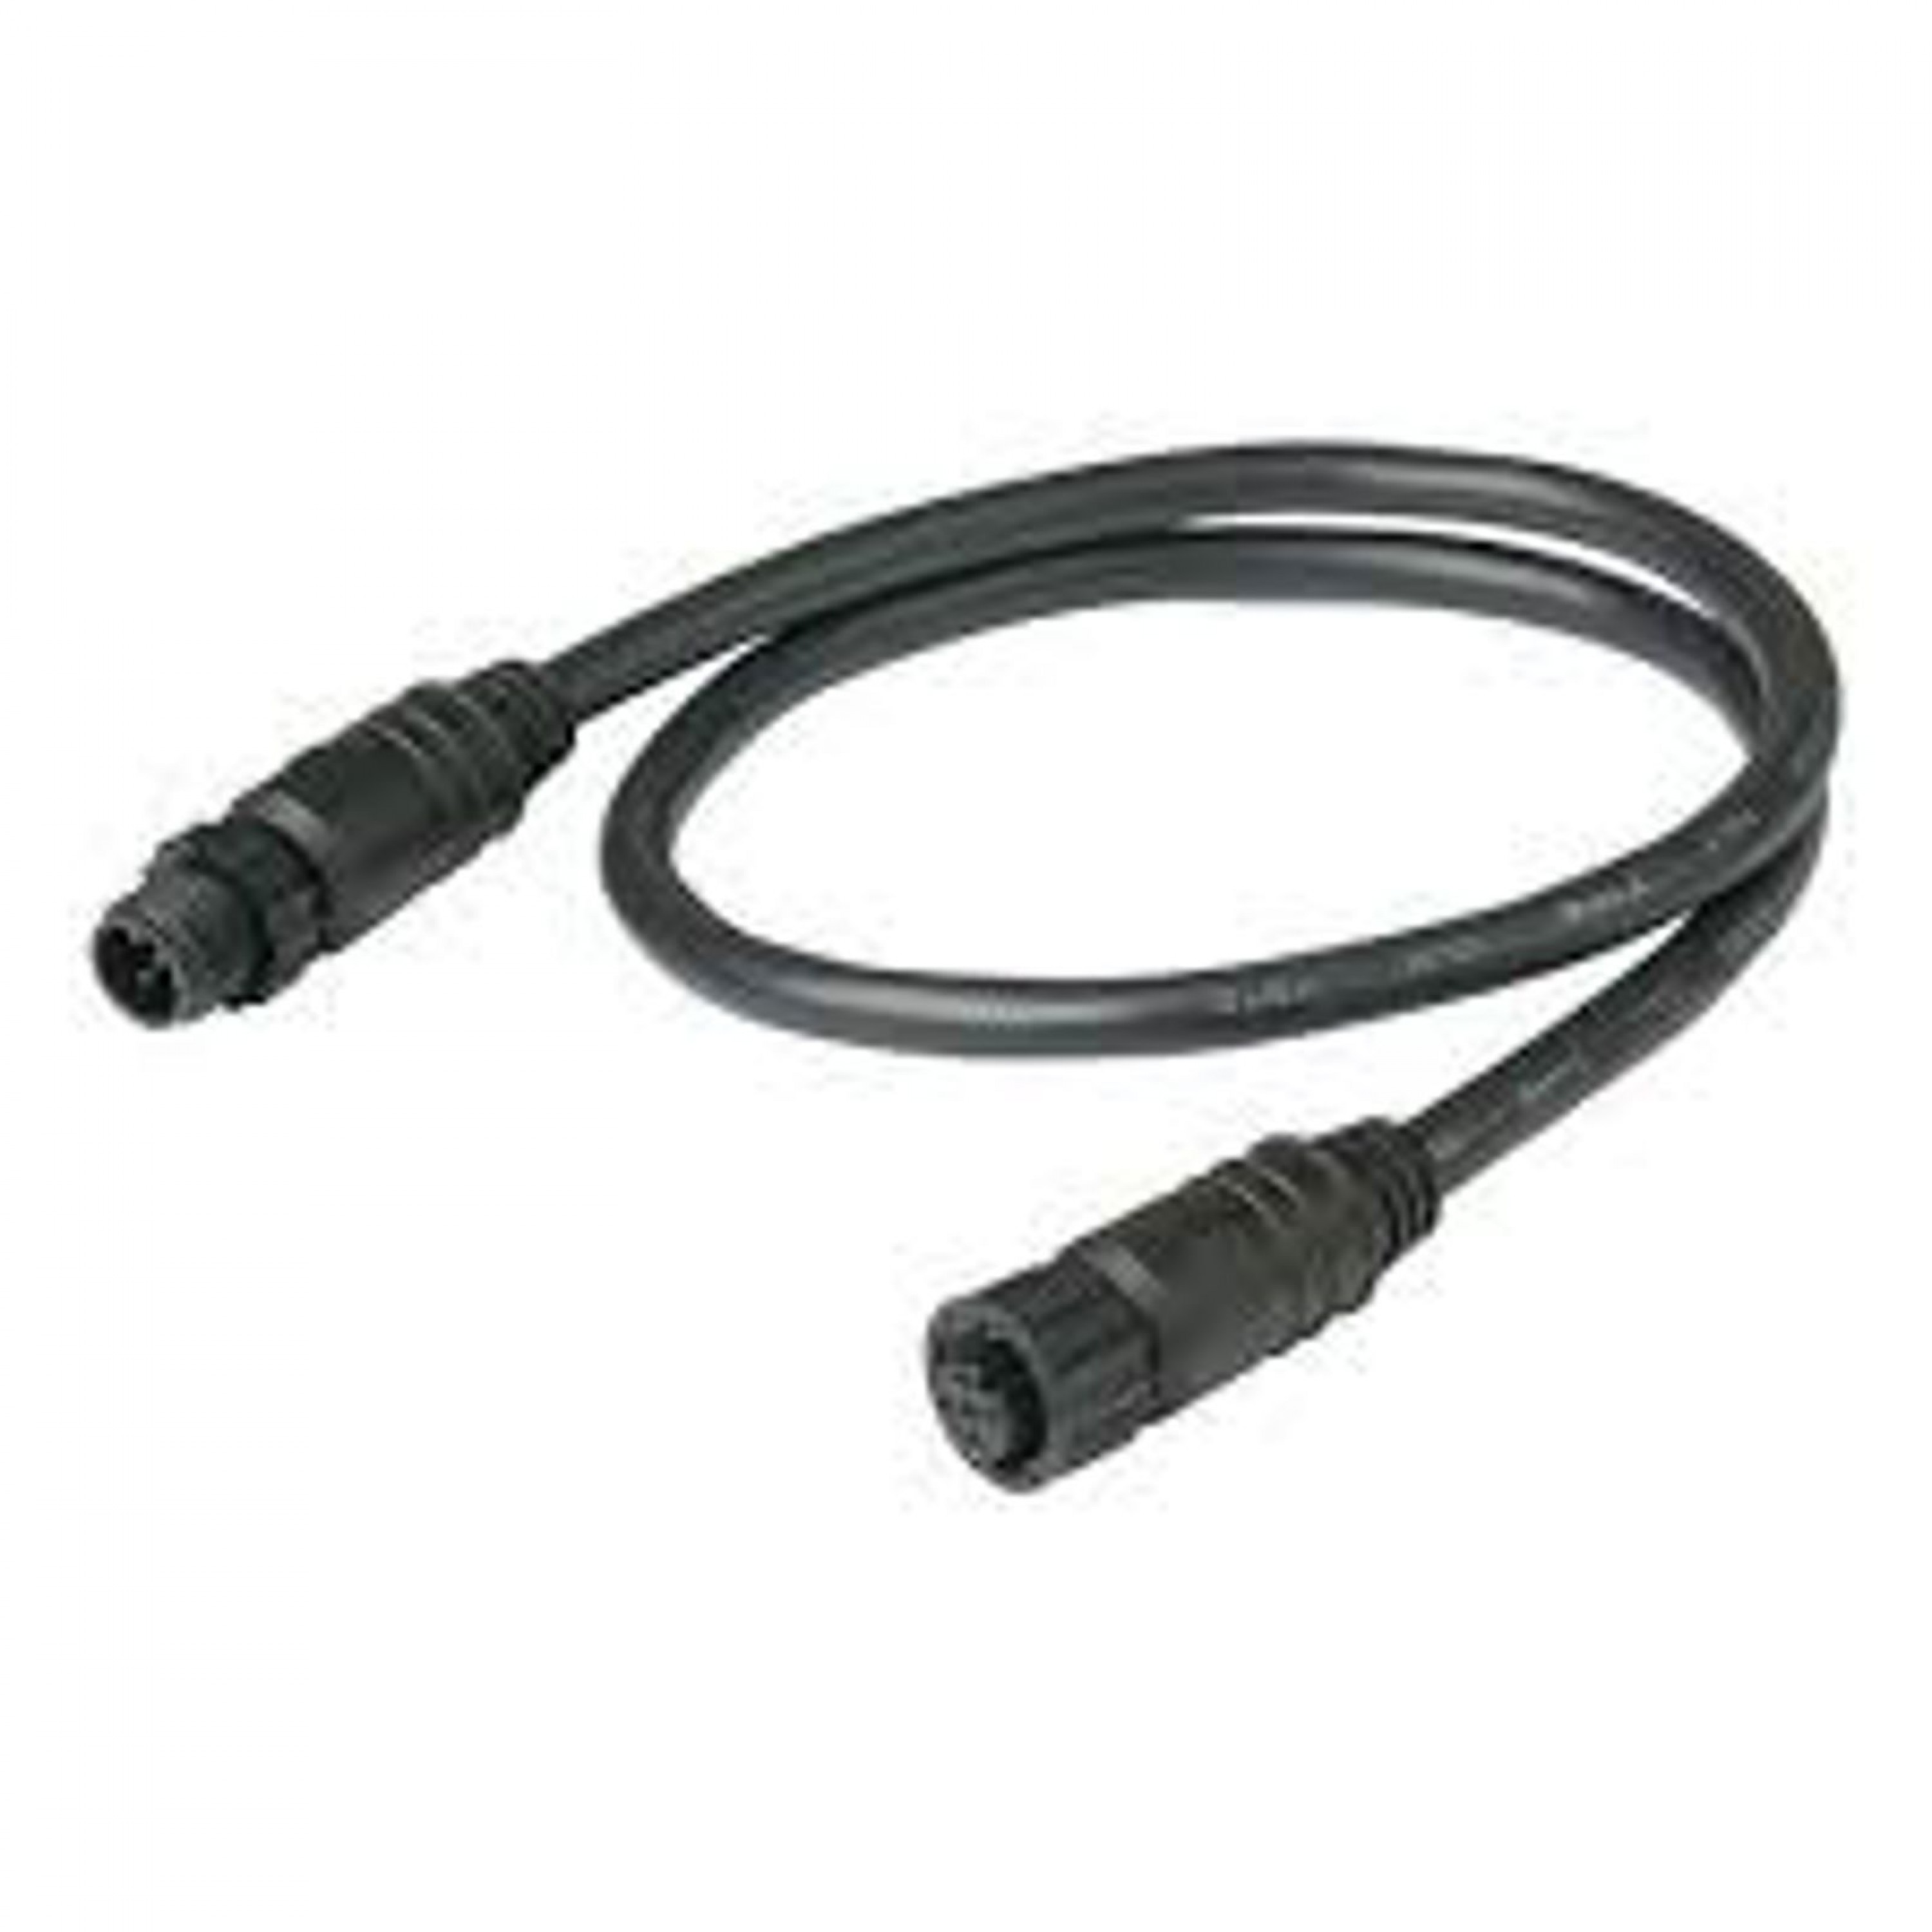 ANCOR DROP CABLE 16 FT 5 METRE